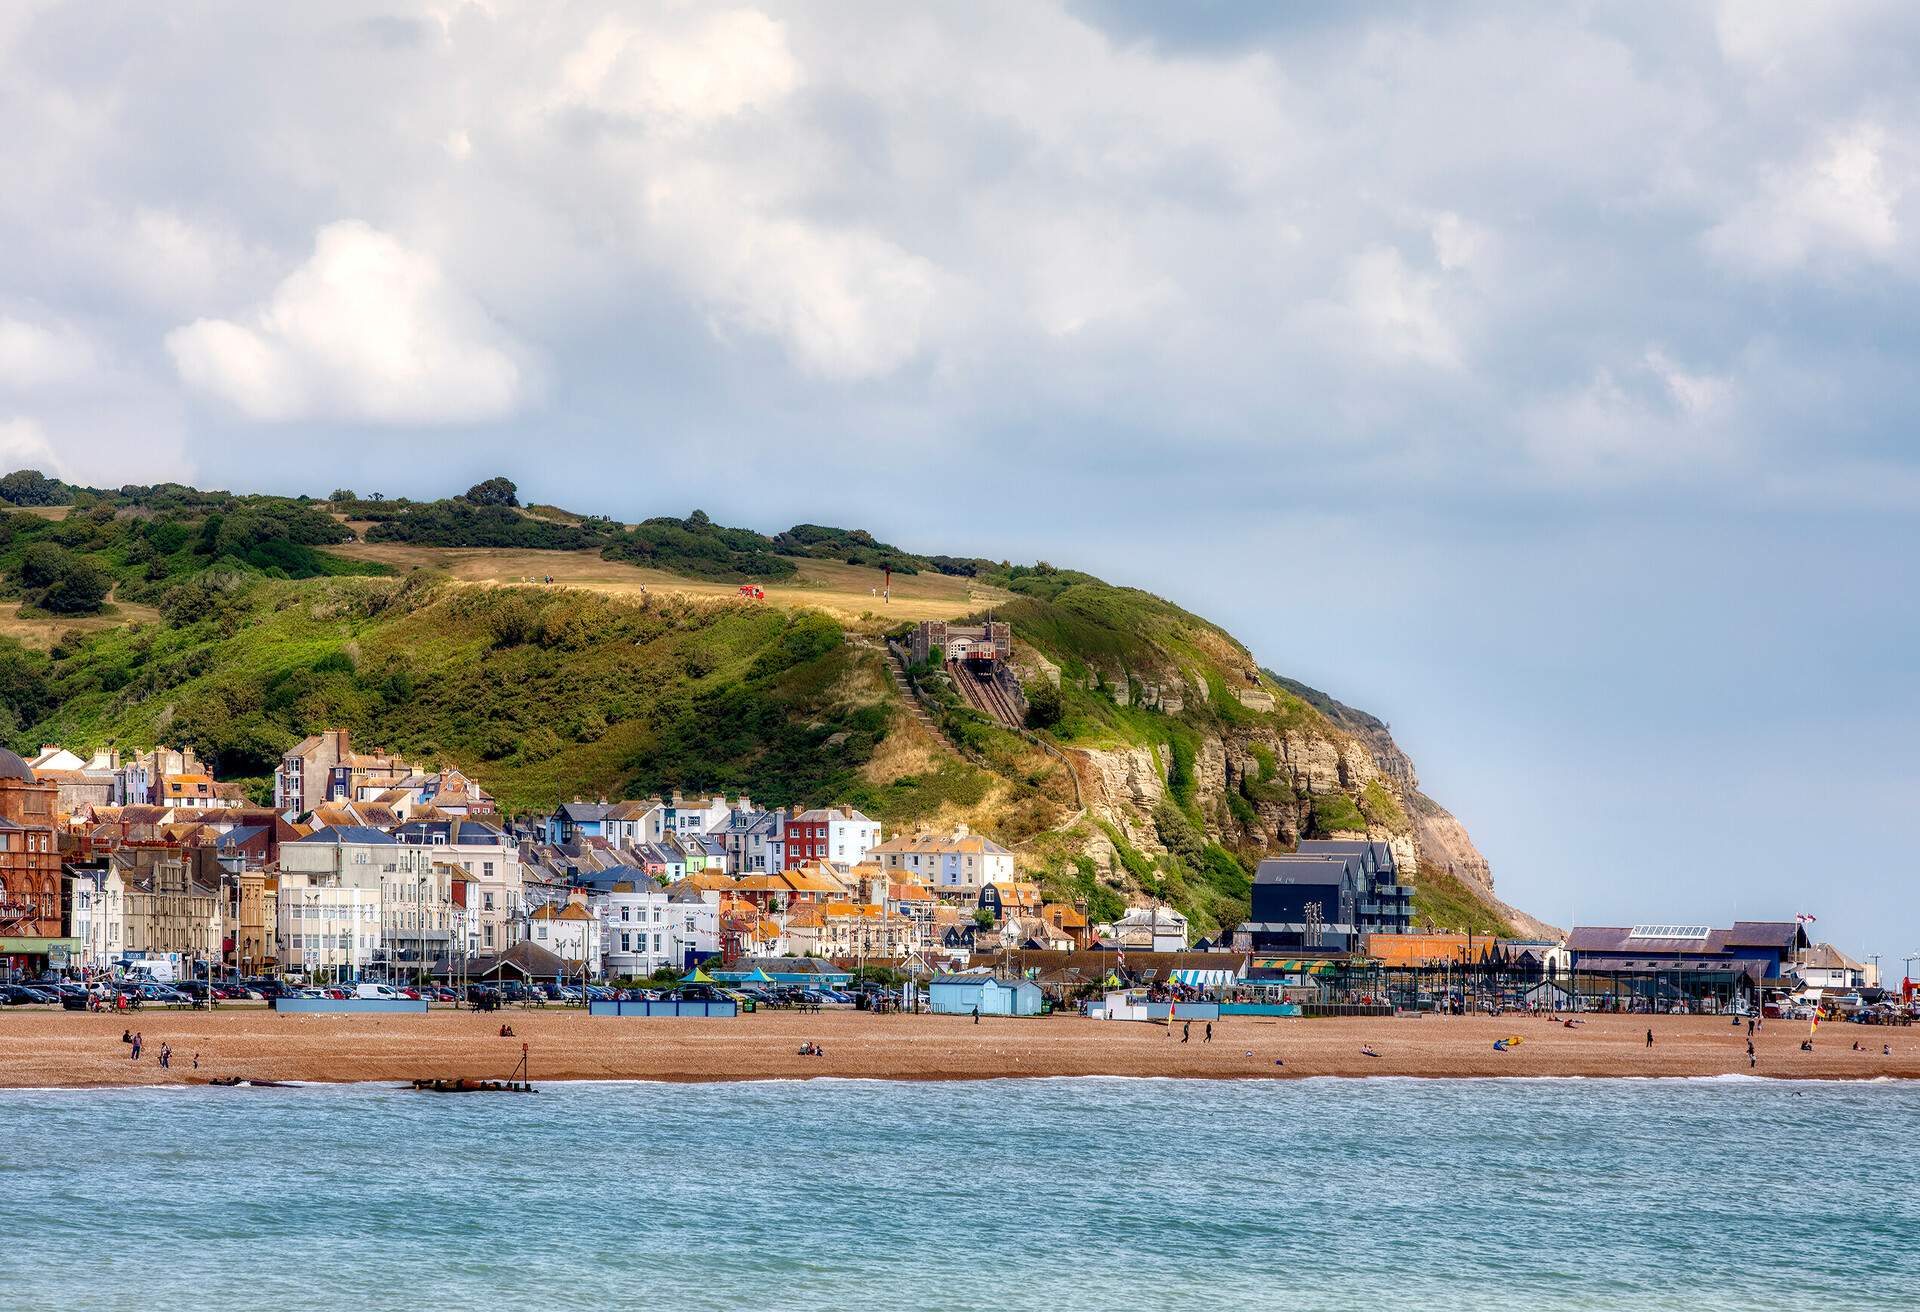 View of East Hill and the Beach of Hastings, England, with the the East Hill Cliff Railway Funicular